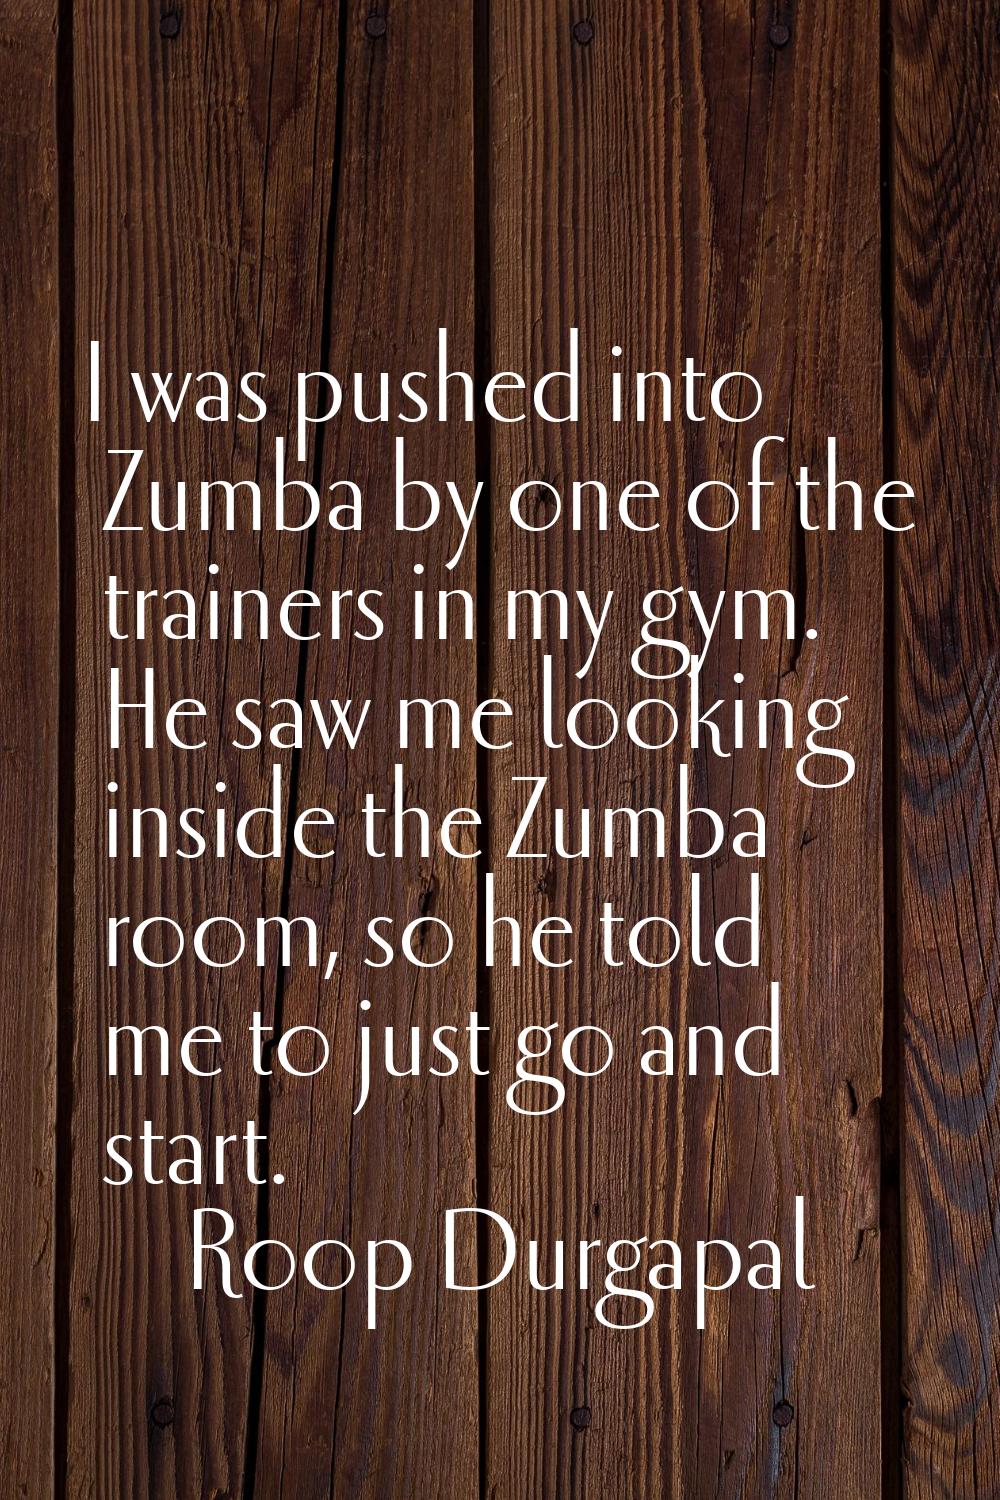 I was pushed into Zumba by one of the trainers in my gym. He saw me looking inside the Zumba room, 